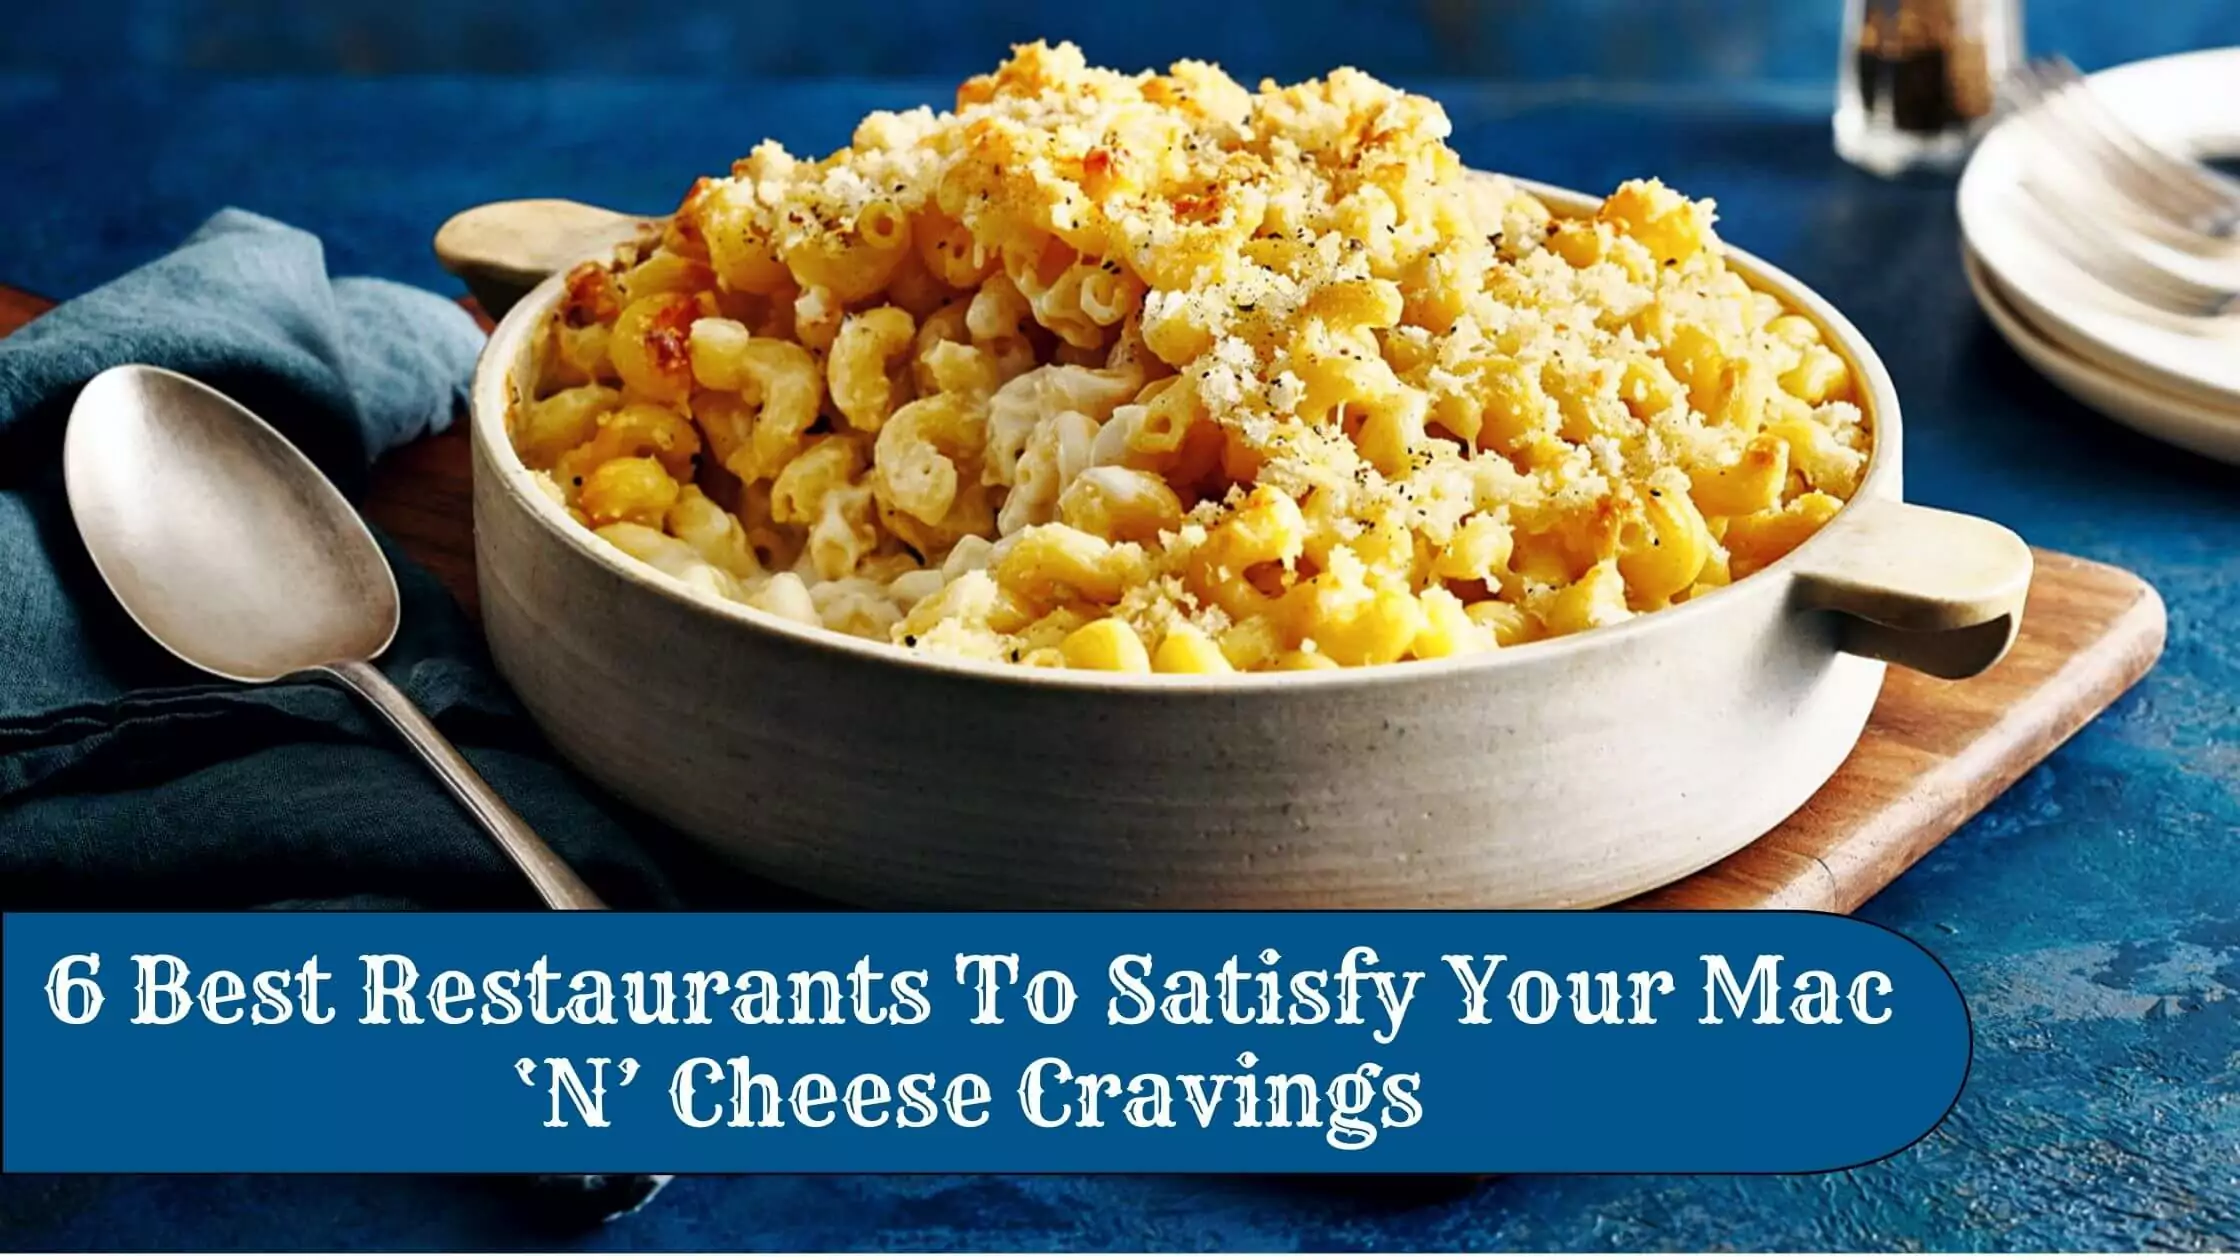 The 6 Best Restaurants To Satisfy Your Mac ‘N’ Cheese Cravings Authenticity Guaranteed!